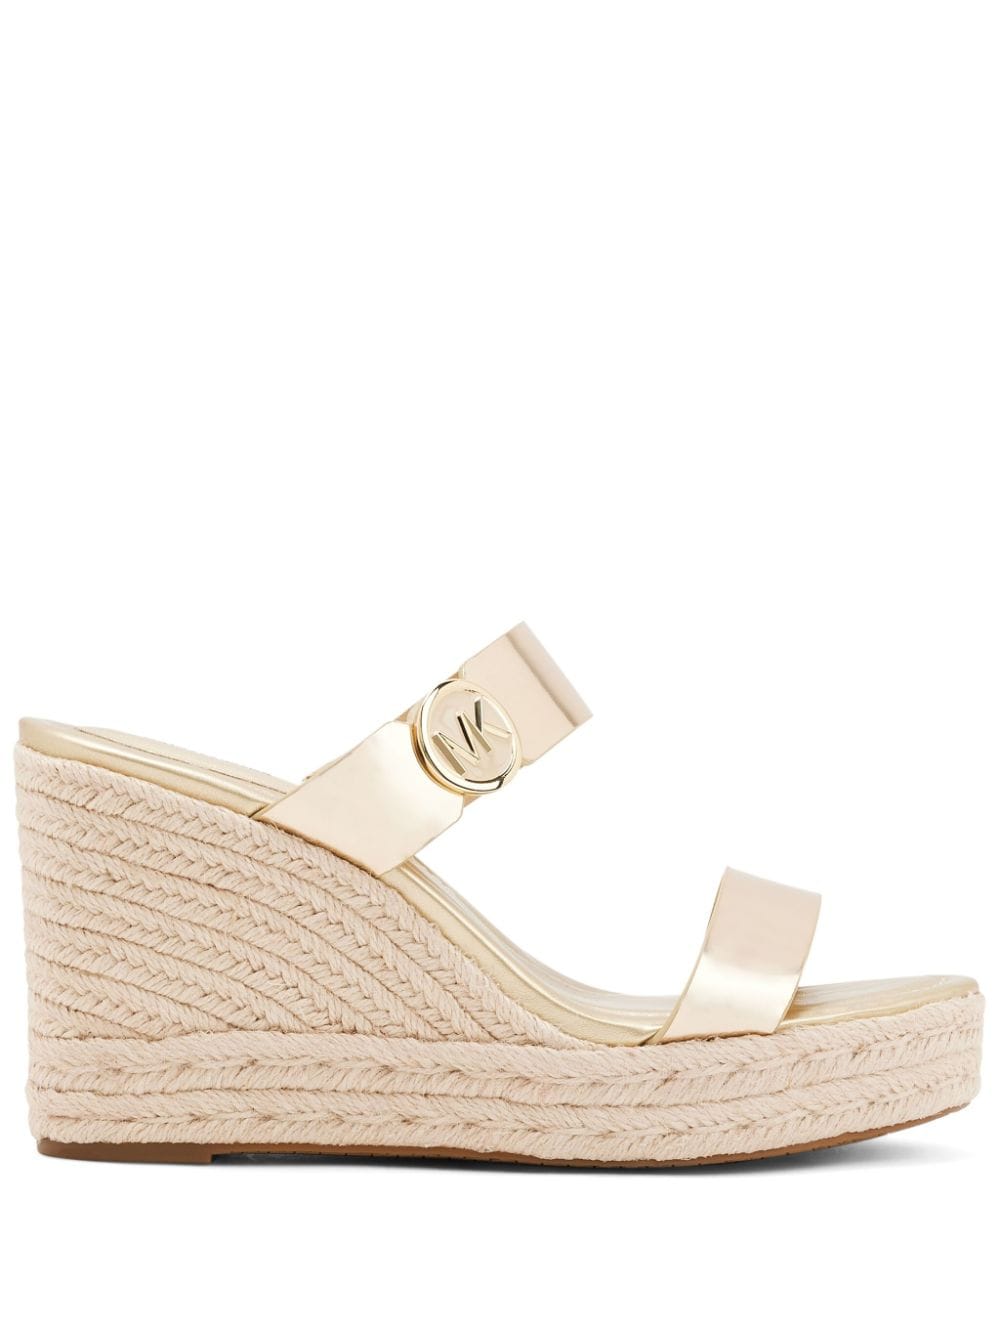 Michael Kors Lucinda Leather Wedge Sandals In Gold